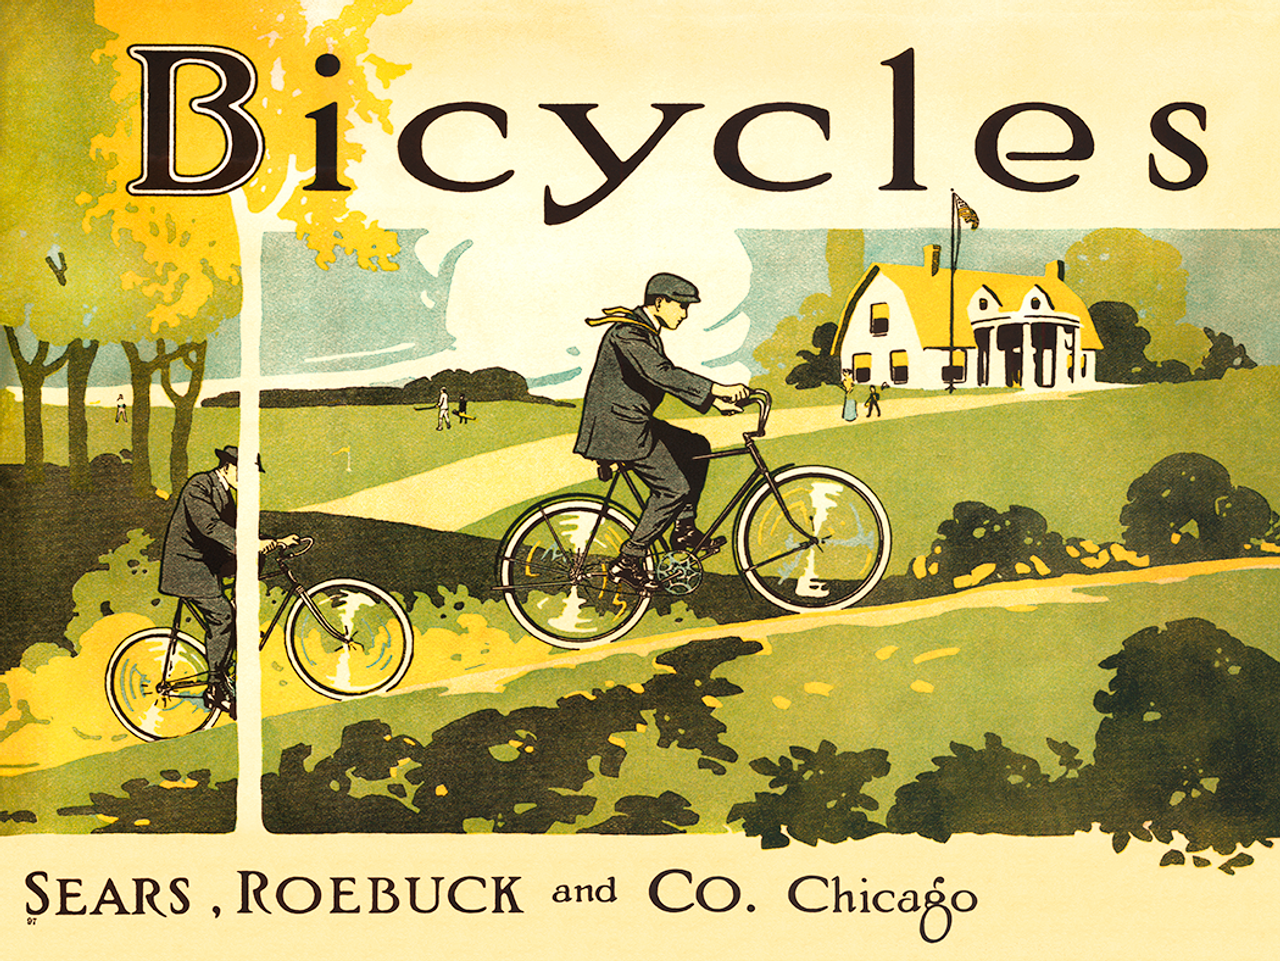 Sears Roebuck and Co. Vintage Bicycle Poster